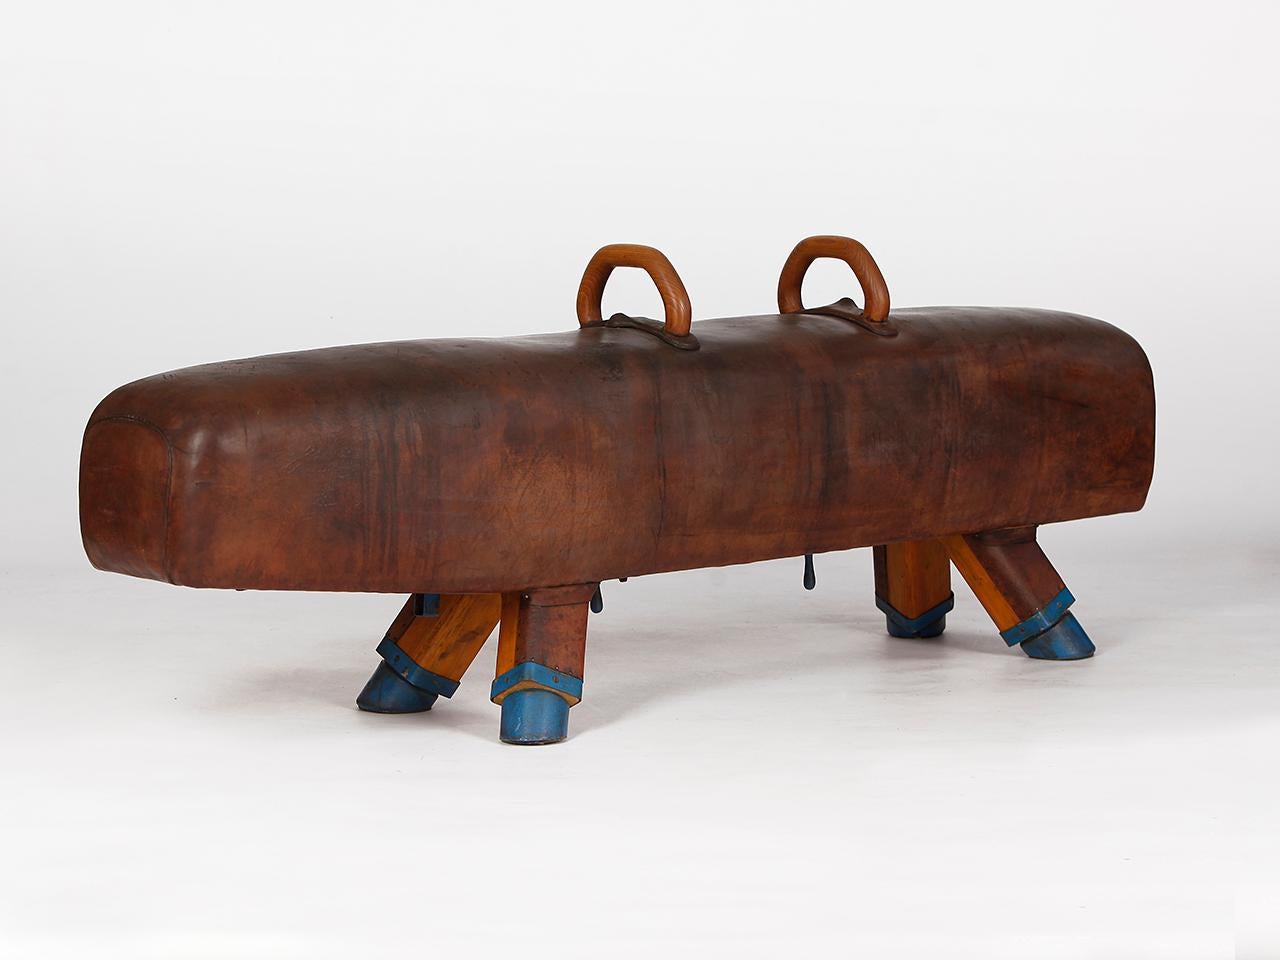 20th Century Gymnastic Leather Pommel Horse Bench, 1920s